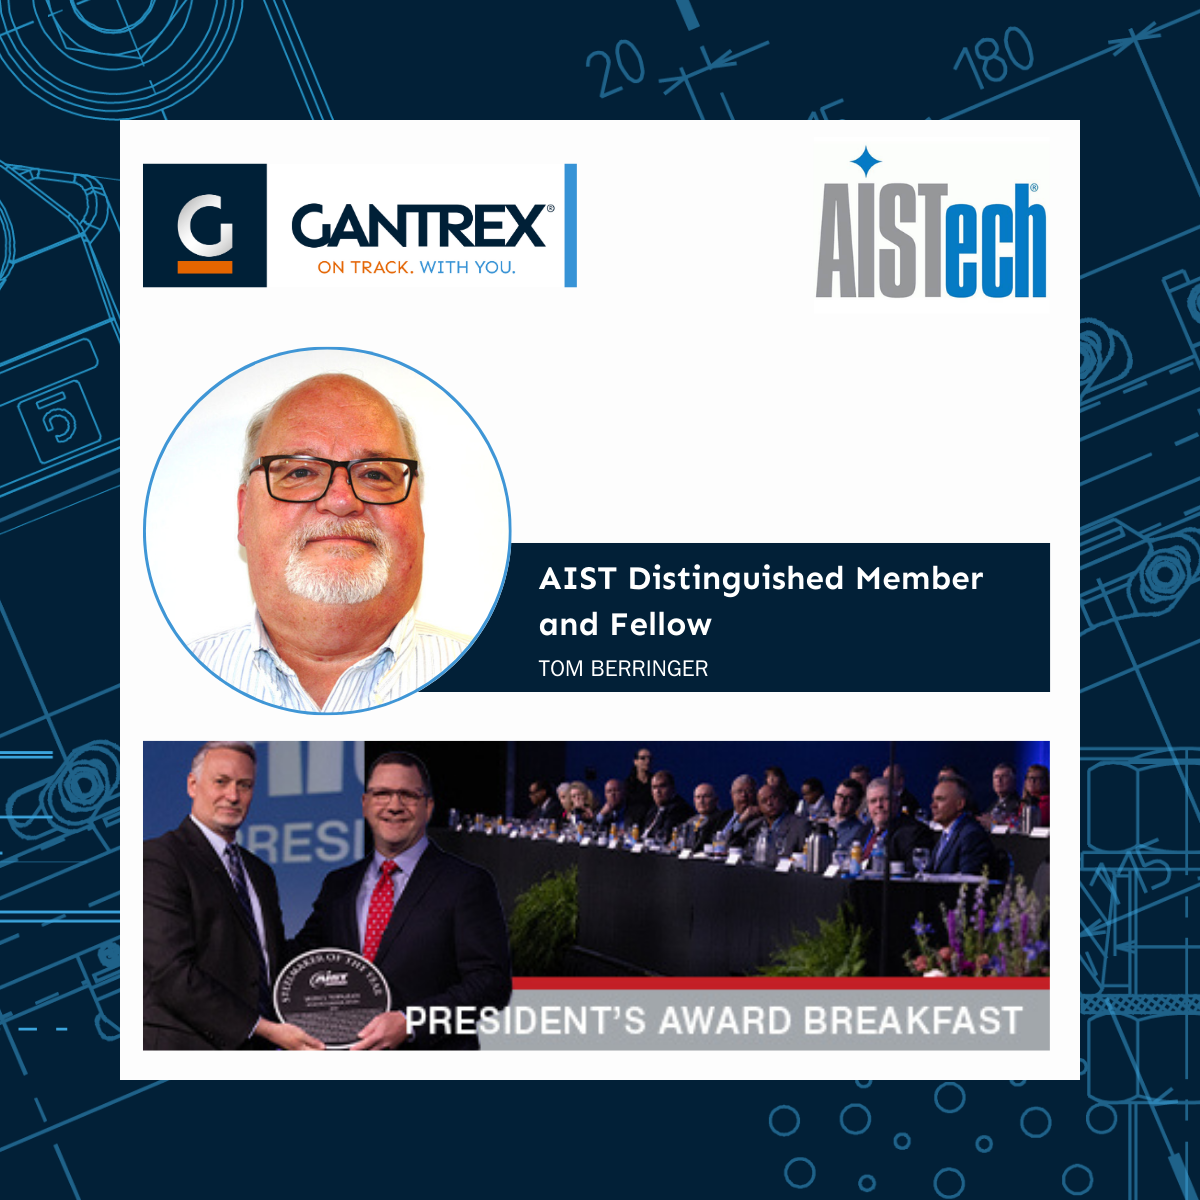 Gantrex Colleague Recognized as AIST Distinguished Member and Fellow